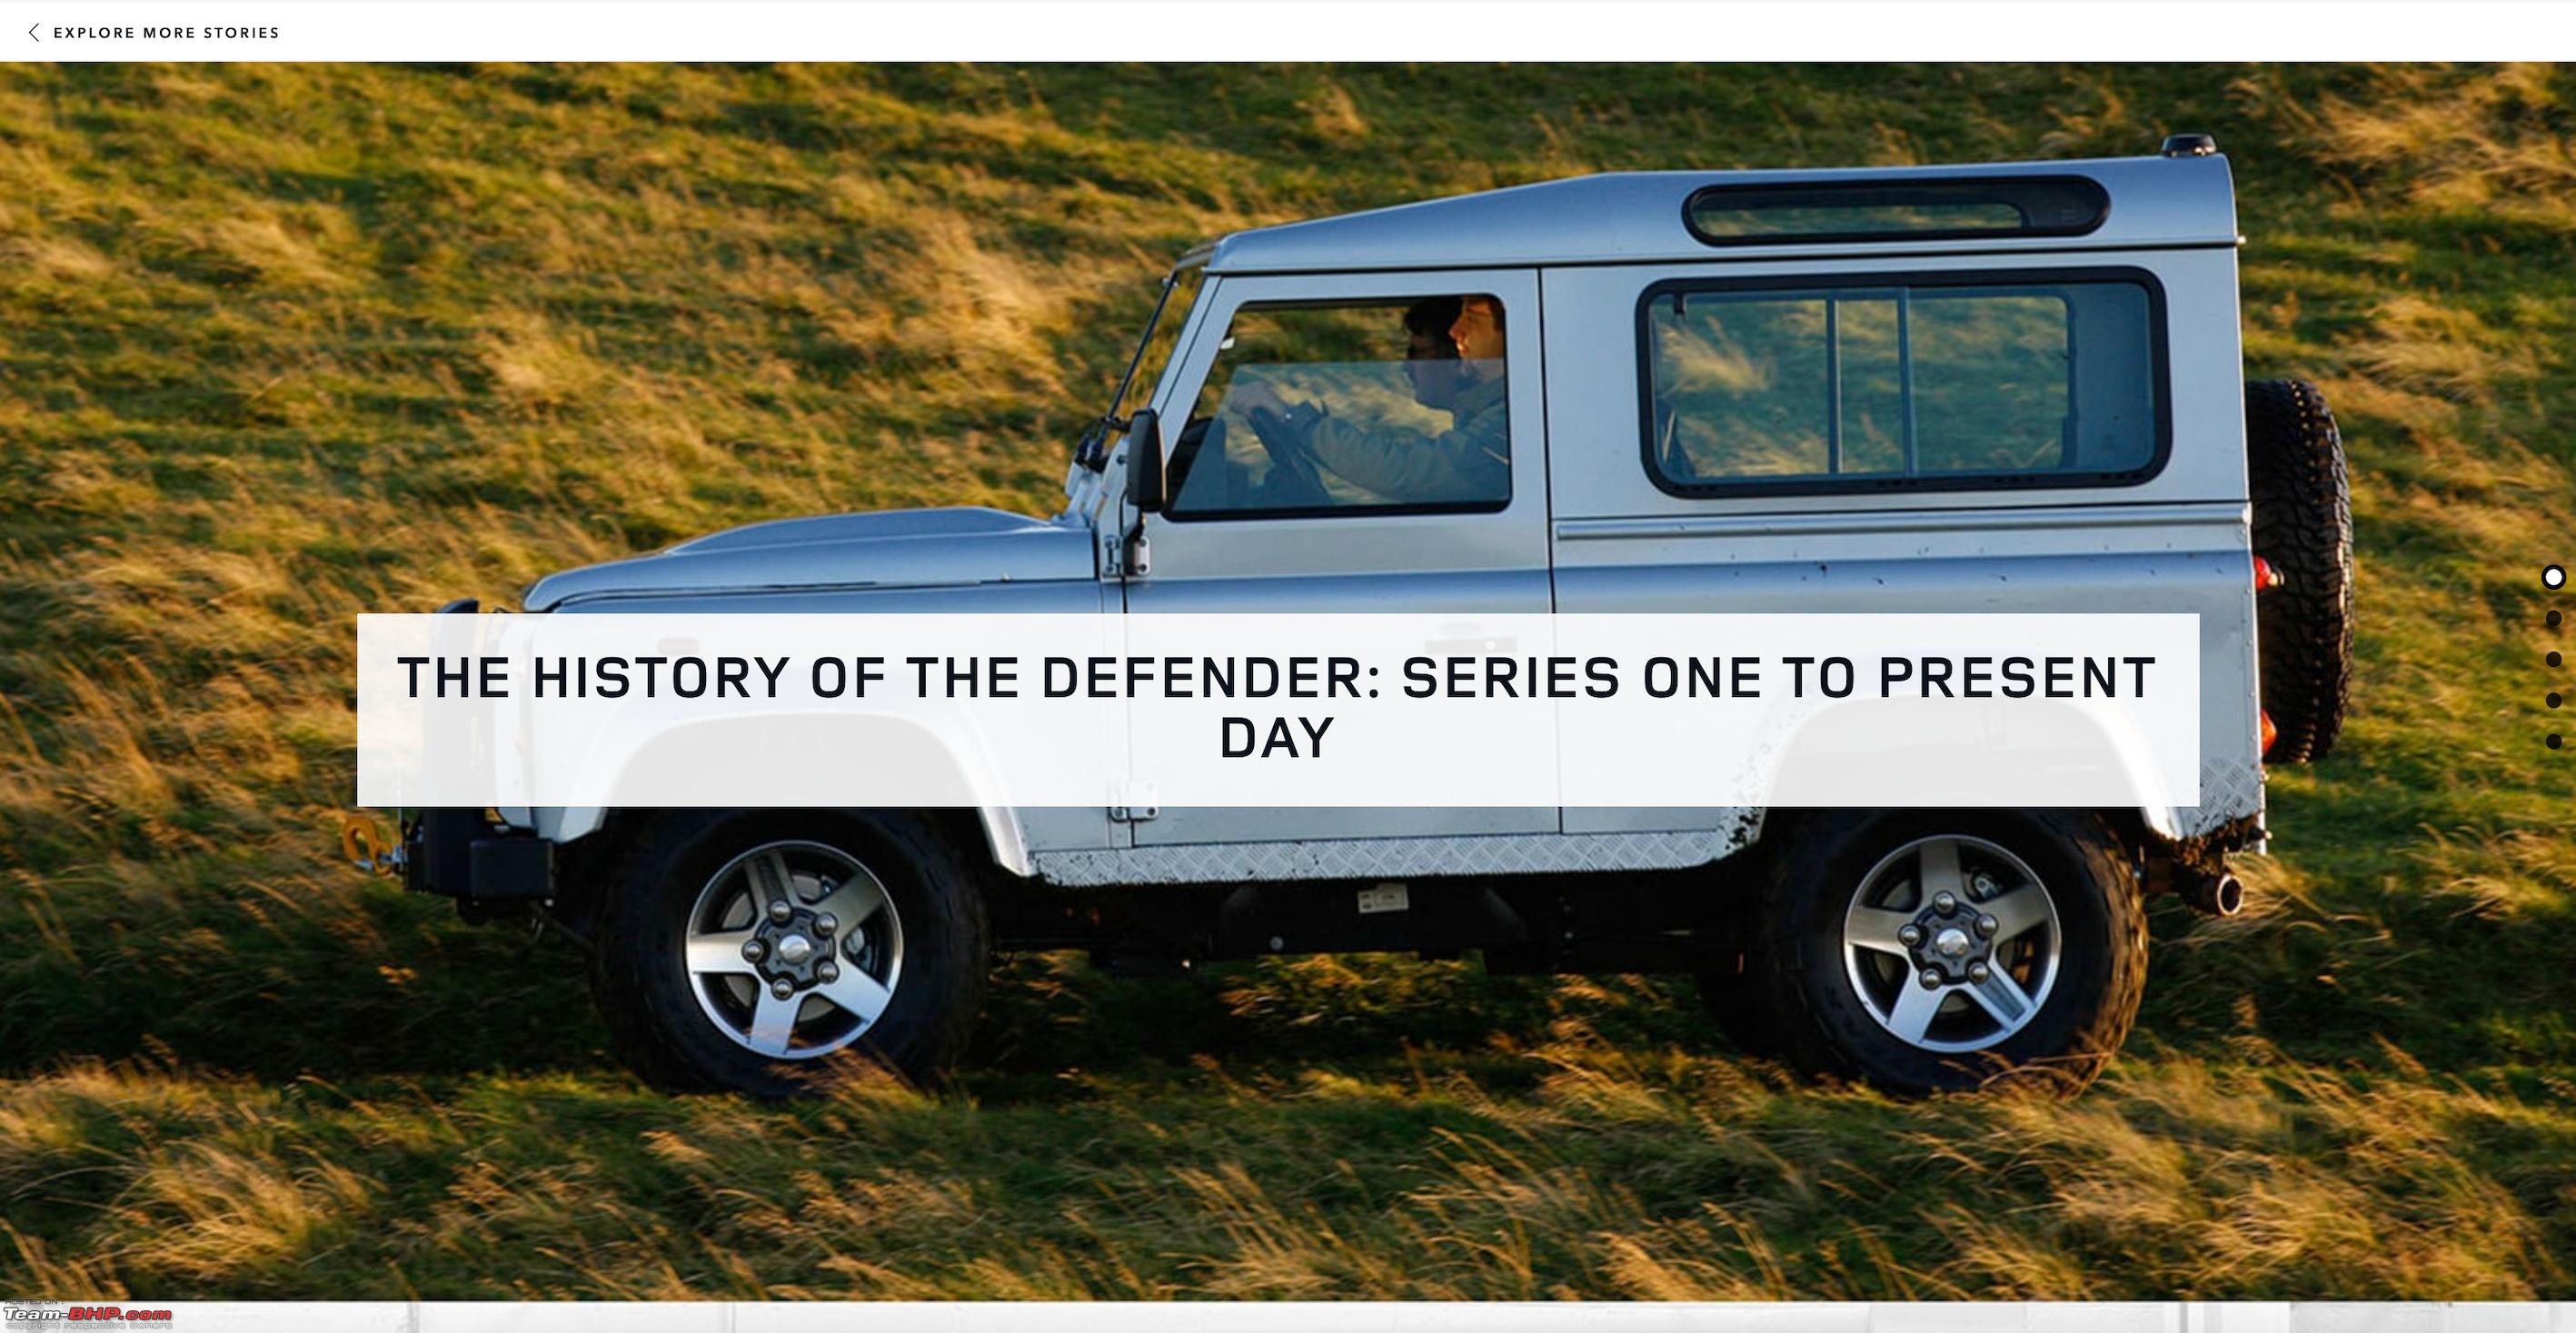 Land Rover Defender Pros and Cons Review: Surprise, Surprise